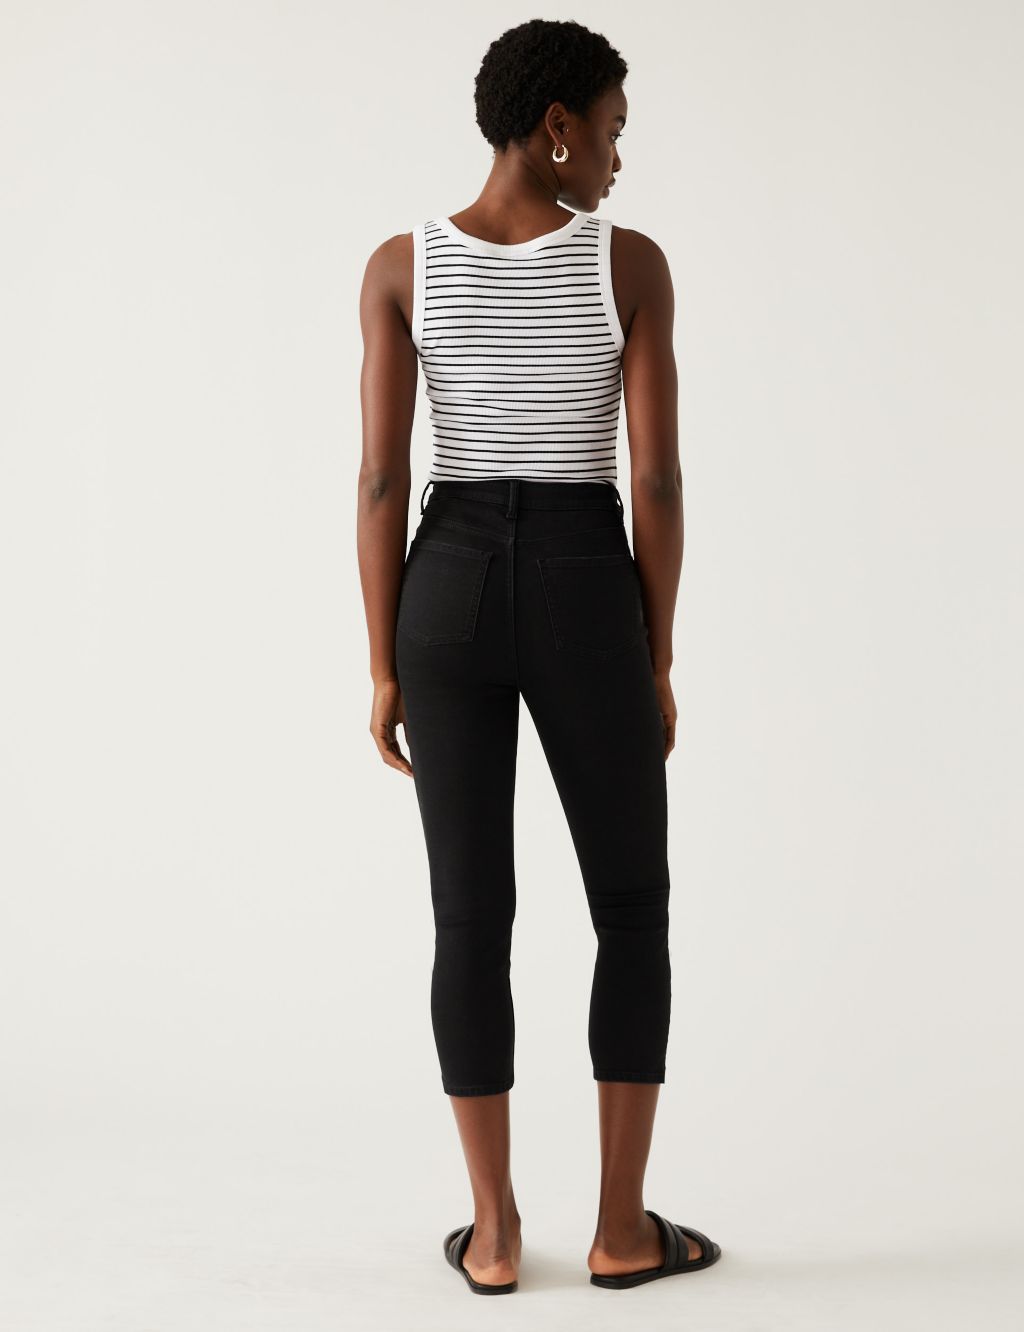 Supersoft High Waisted Skinny Cropped Jeans image 4